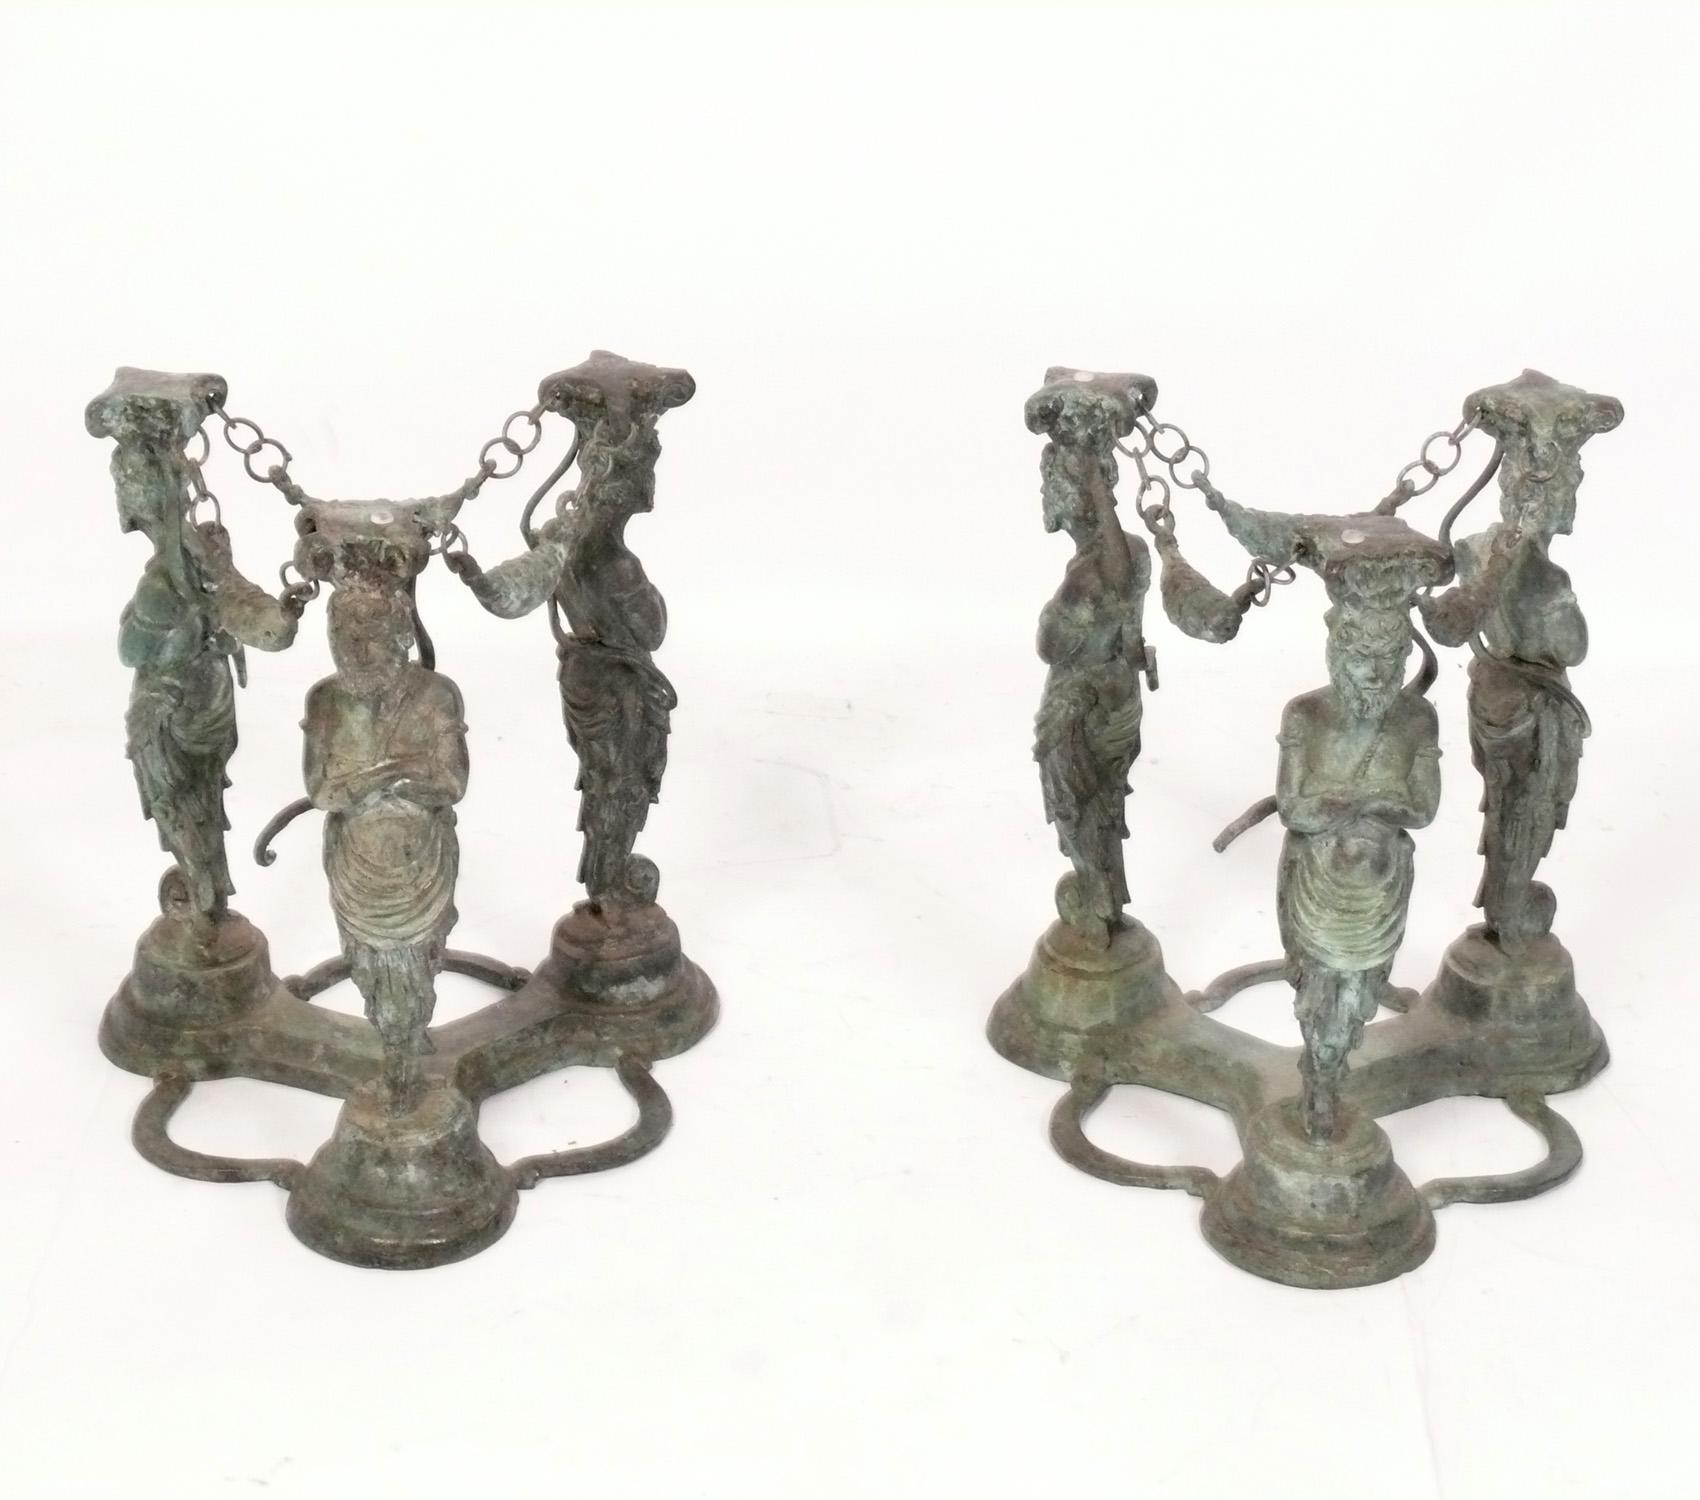 Pair of Neoclassical Grecian Bronze Figural End Tables, believed to be circa 1940s, possibly much earlier. They retain their warm original verdigris patina. The price noted does not include the glass tops, as they have various chips, scratches, and